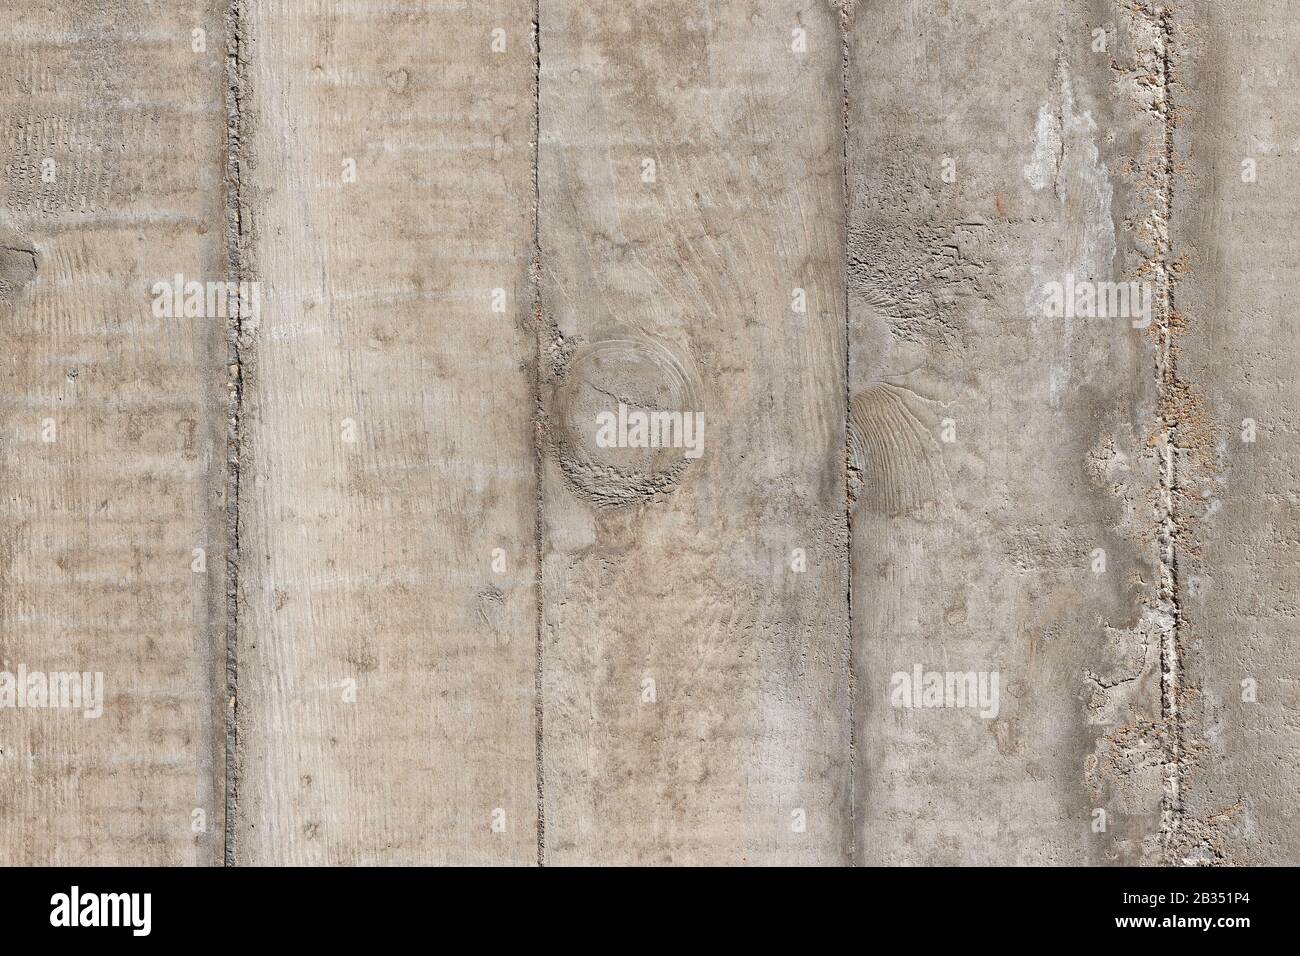 Concrete-Wood-Imprint-Background: background detailed texture of a rough grey-brown concrete wall, showing imprints of  wood  planks Stock Photo